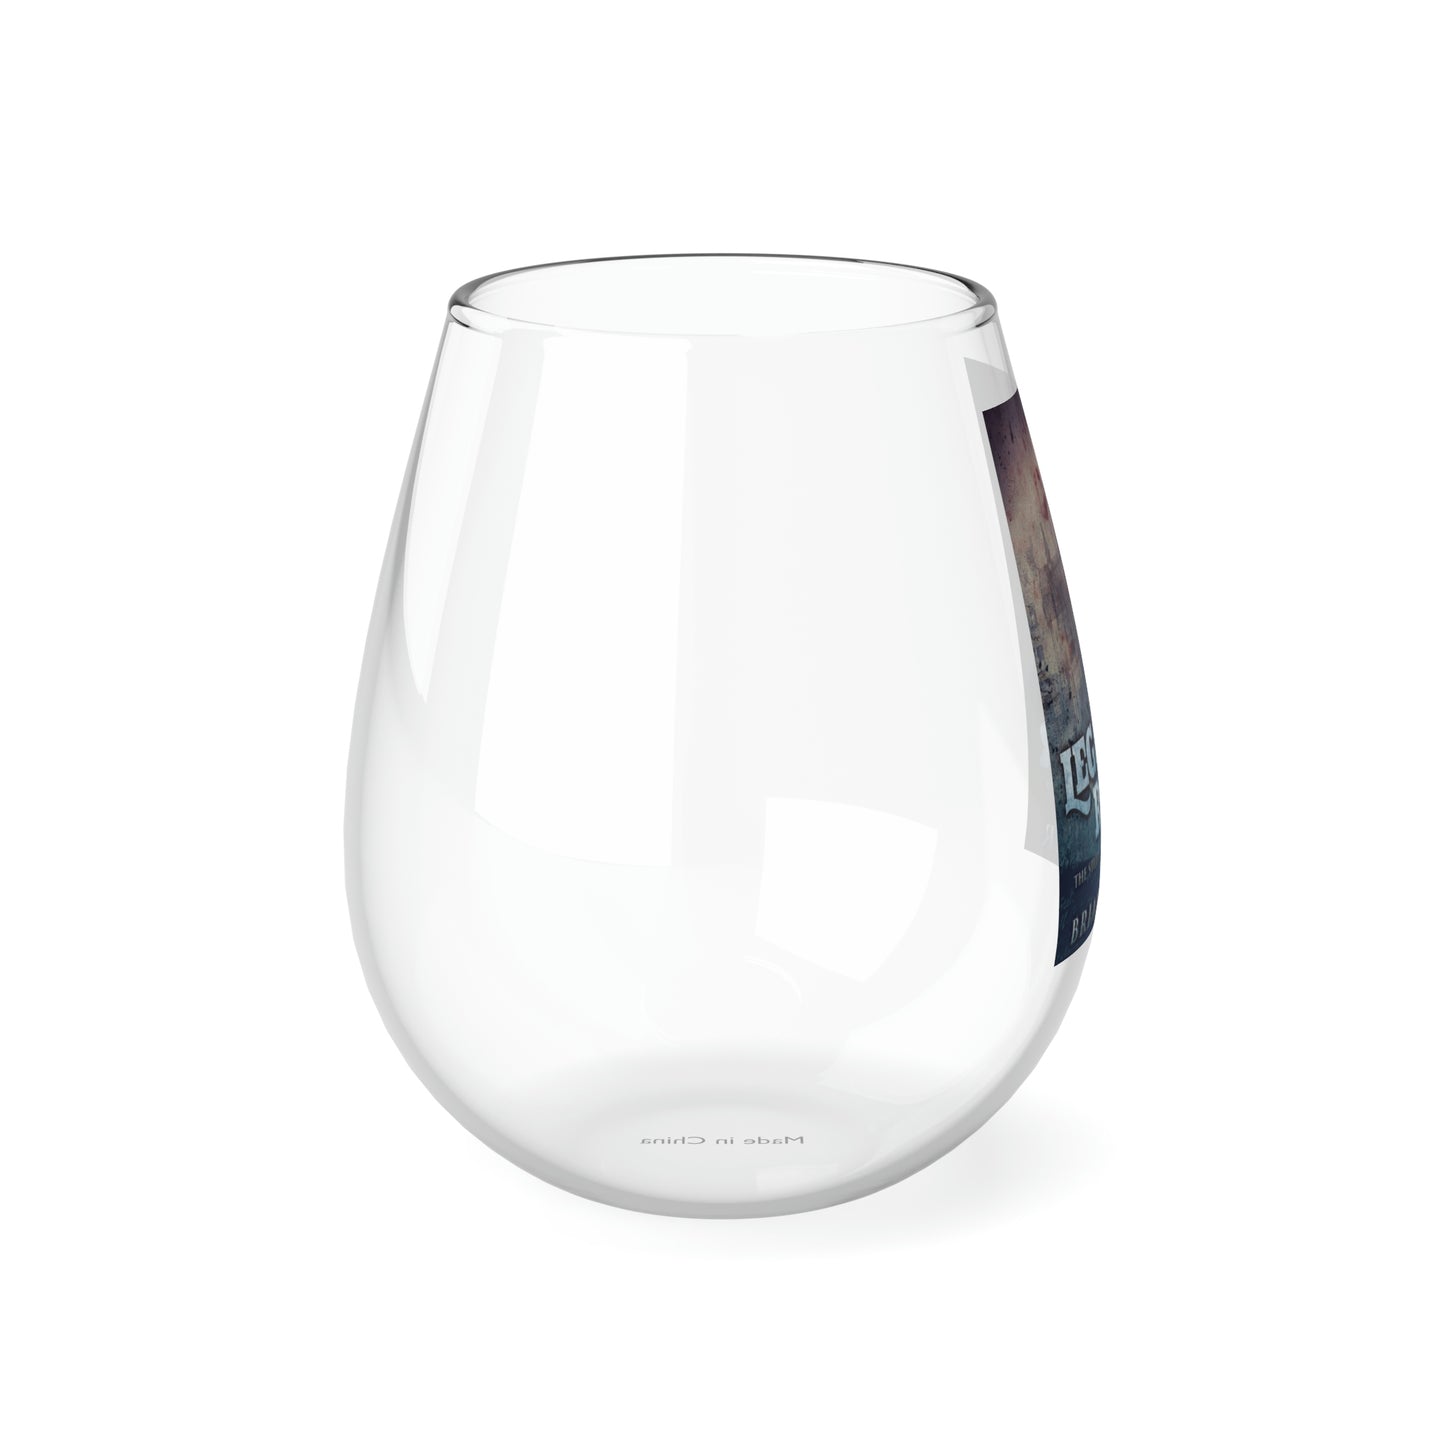 Legacy Of The Ripper - Stemless Wine Glass, 11.75oz